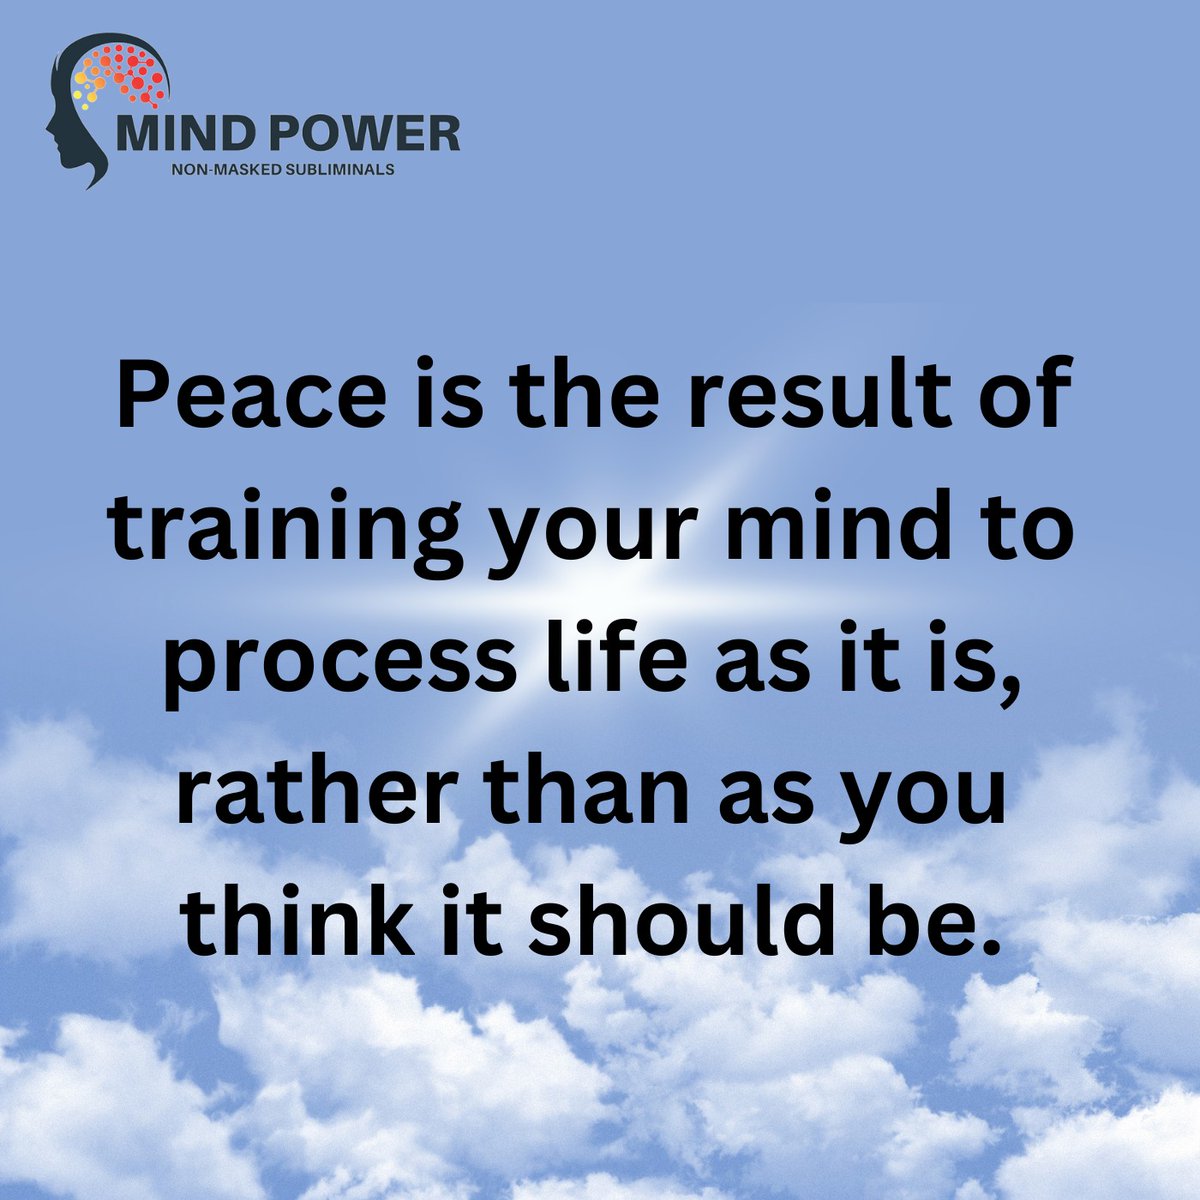 Peace begins with a relaxed mind and a tranquil heart.

#PeacefulMind #TranquilHeart #InnerPeace #Relaxation #PeacefulLife #PeacefulMindset #CalmHeart #Serenity #PeacefulThoughts #PeacefulLiving #MindfulLiving #StressRelief #PeacefulMoments #PeaceWithin #TranquilMind #RelaxedSoul